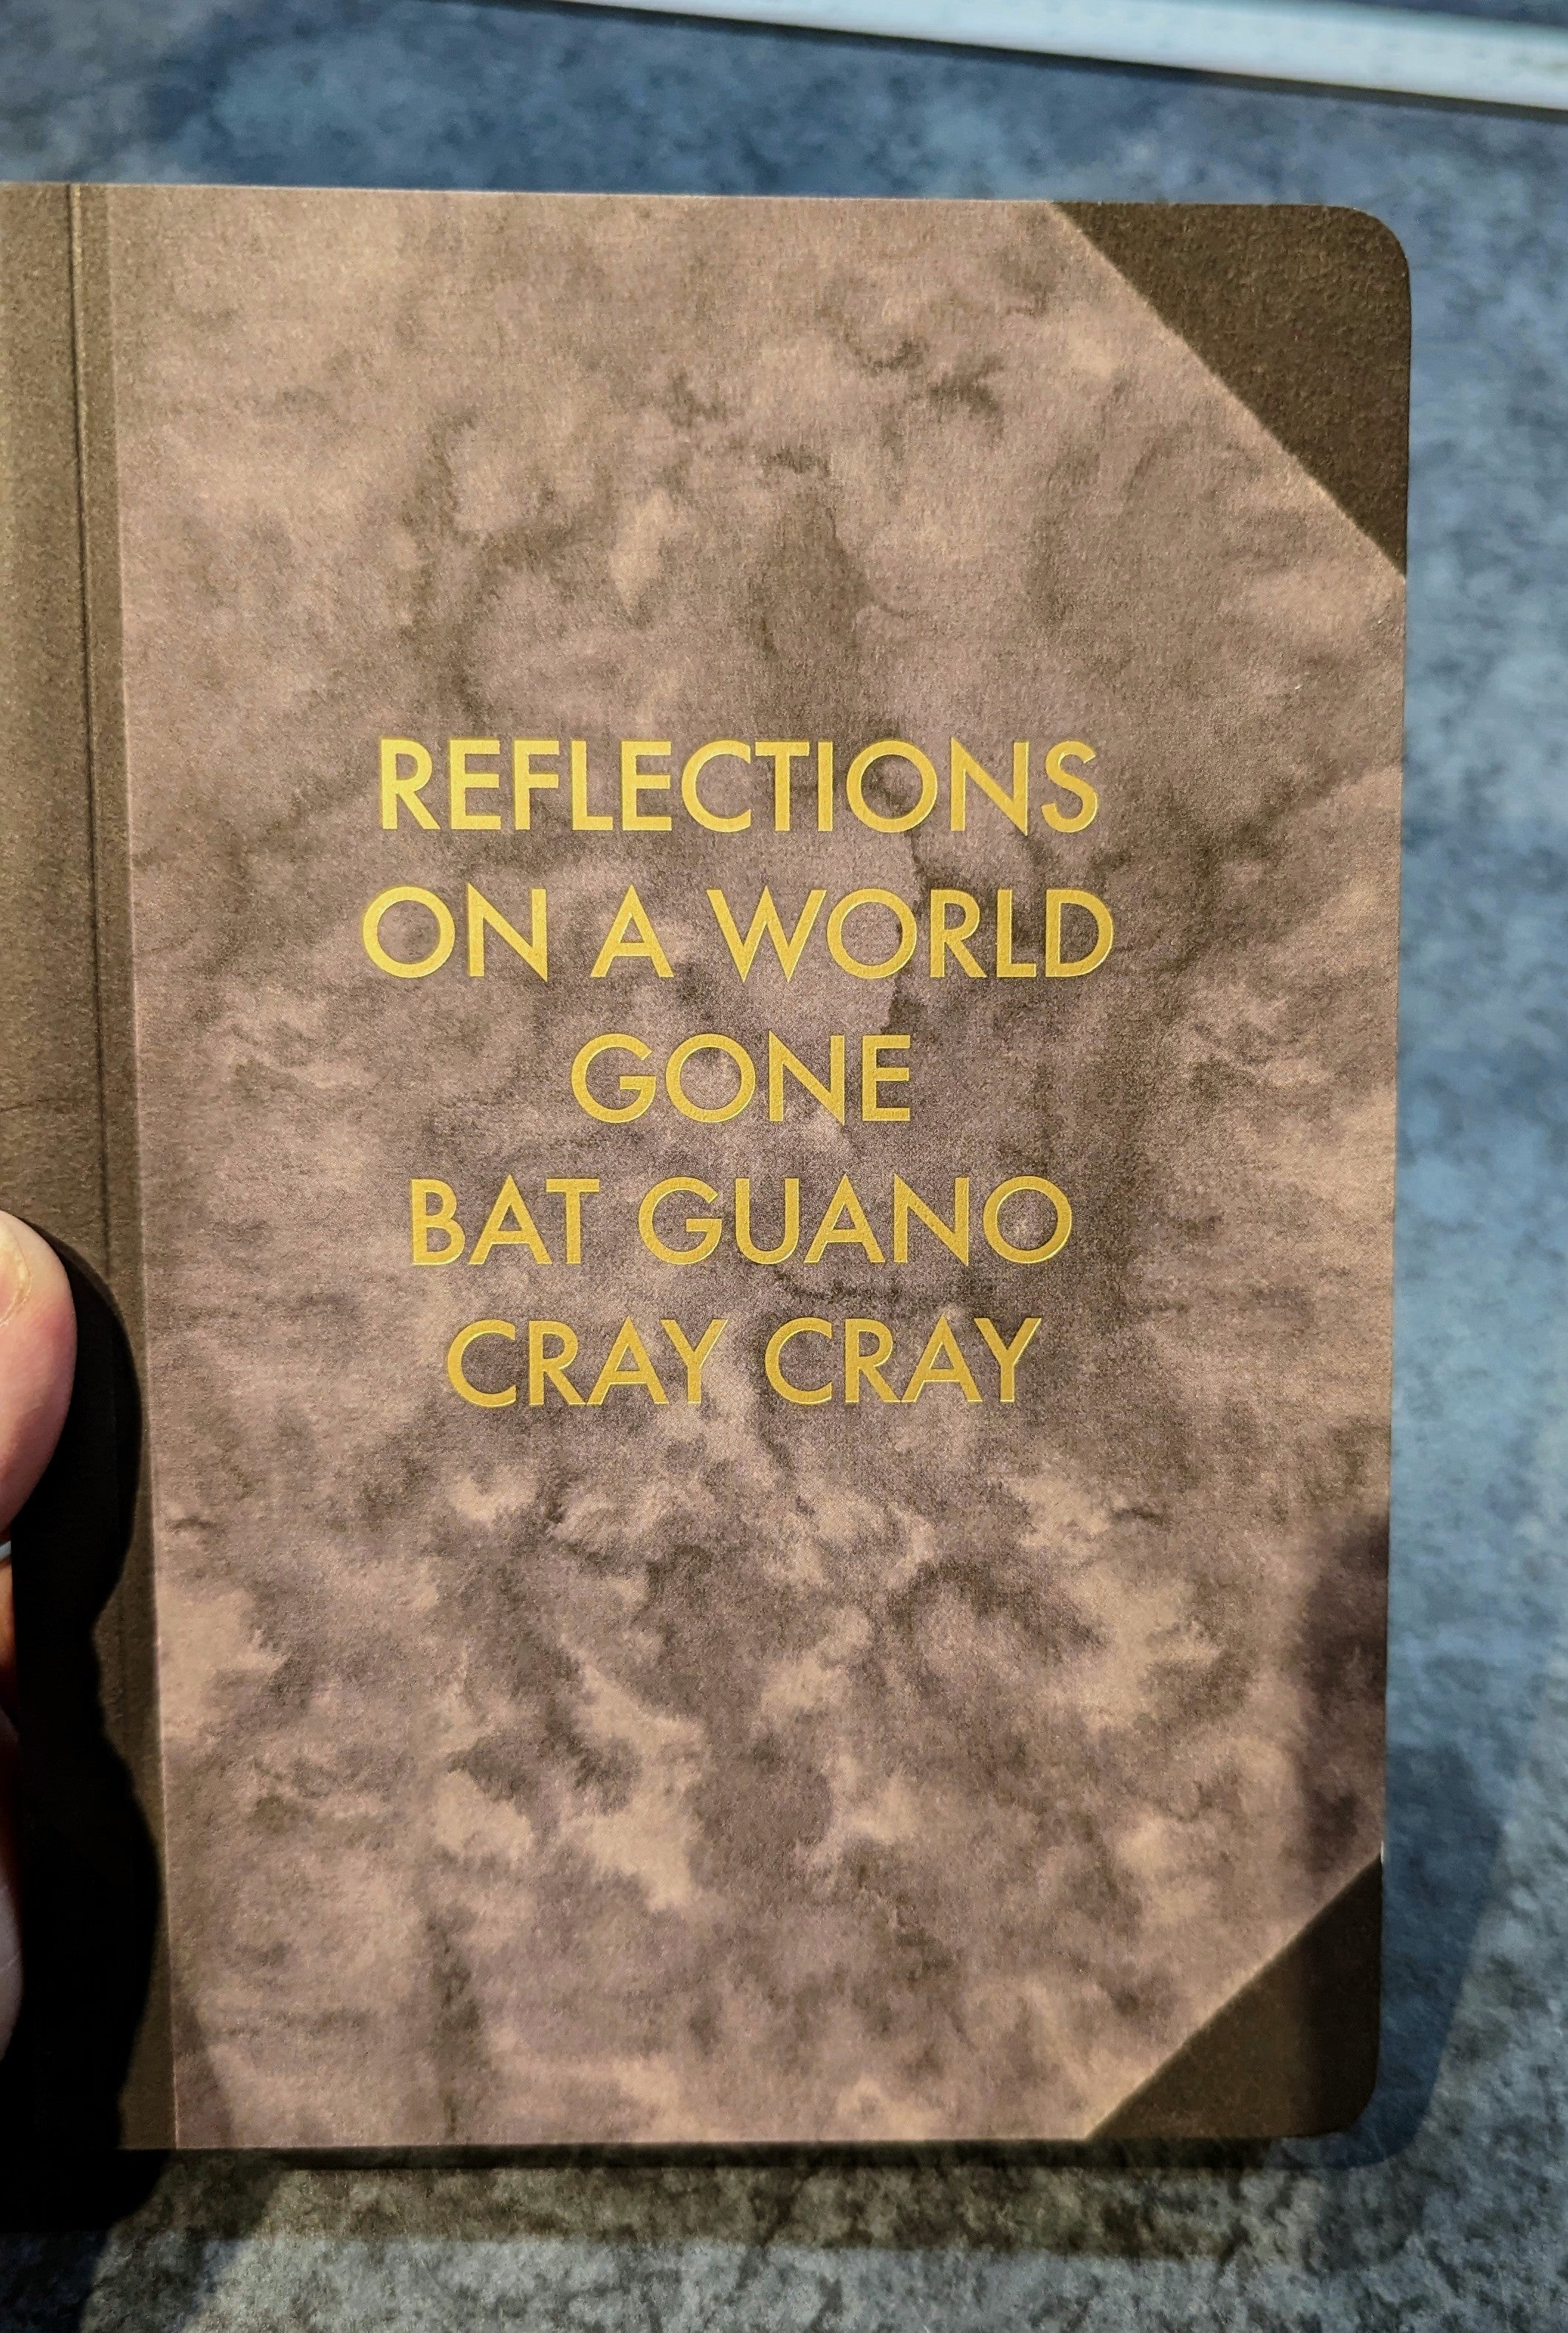 Reflections On A World Gone Bat Guano Cray Cray